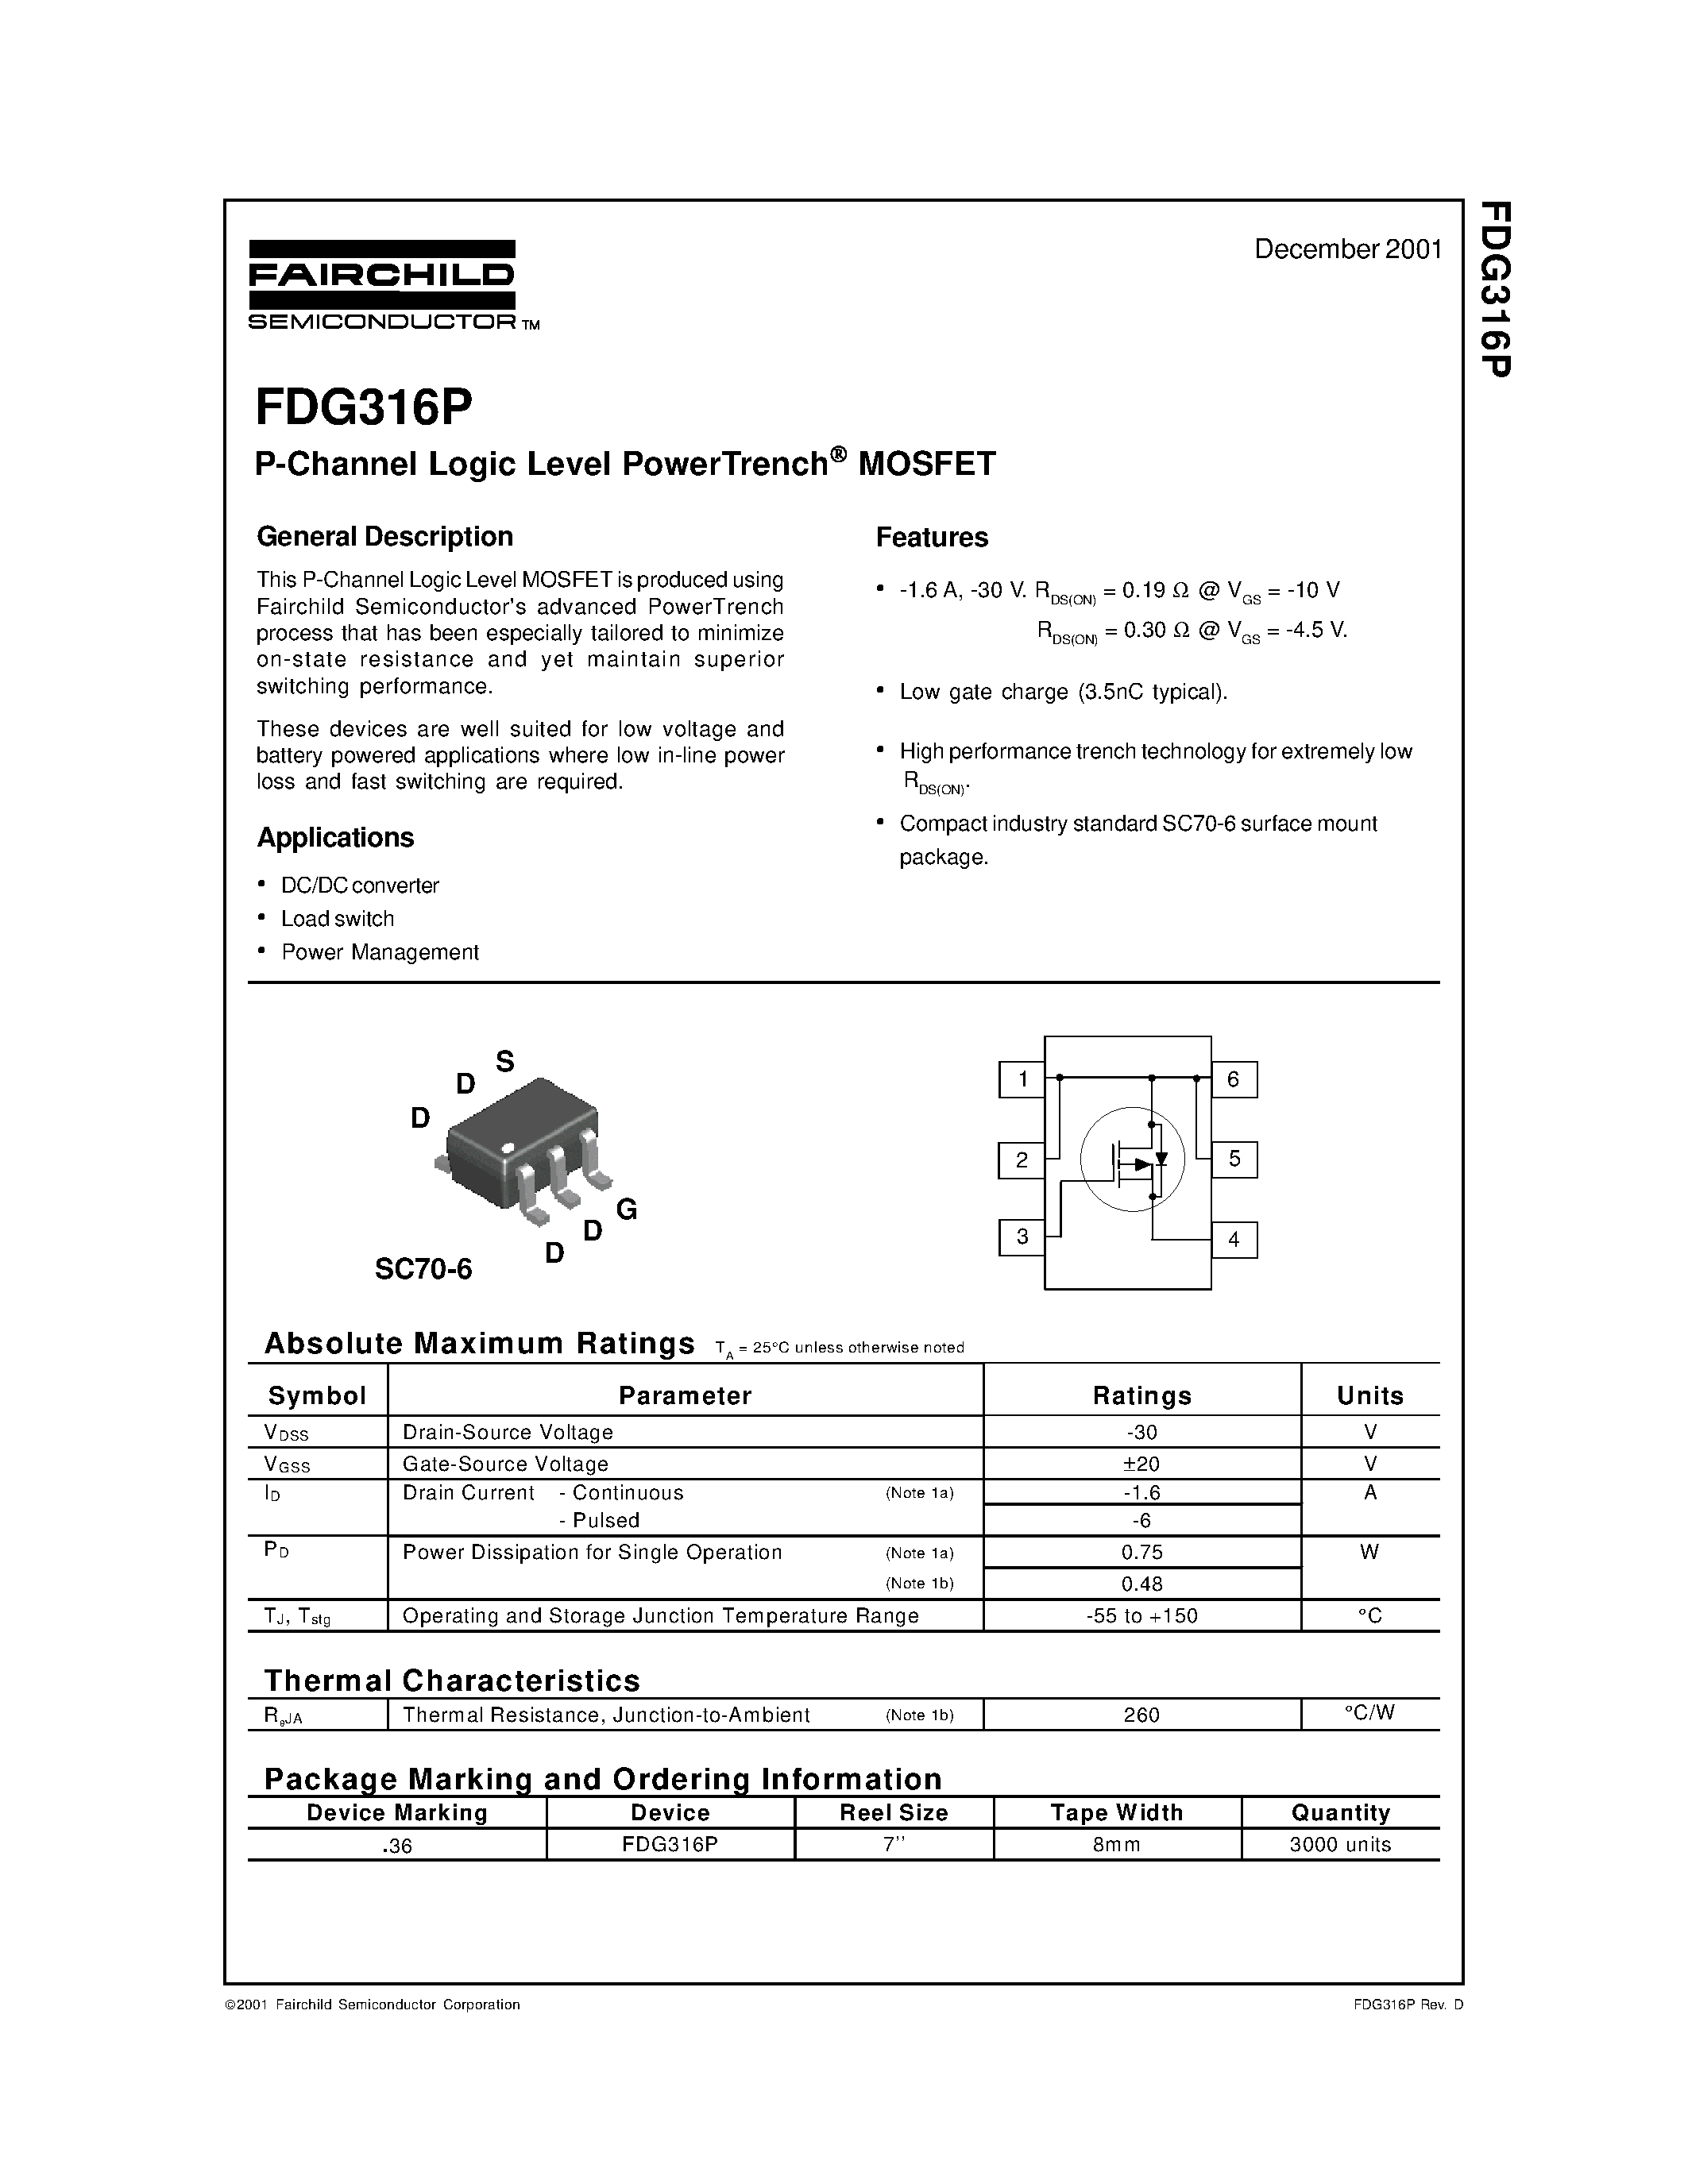 Даташит FDG316P - P-Channel Logic Level PowerTrench MOSFET страница 1